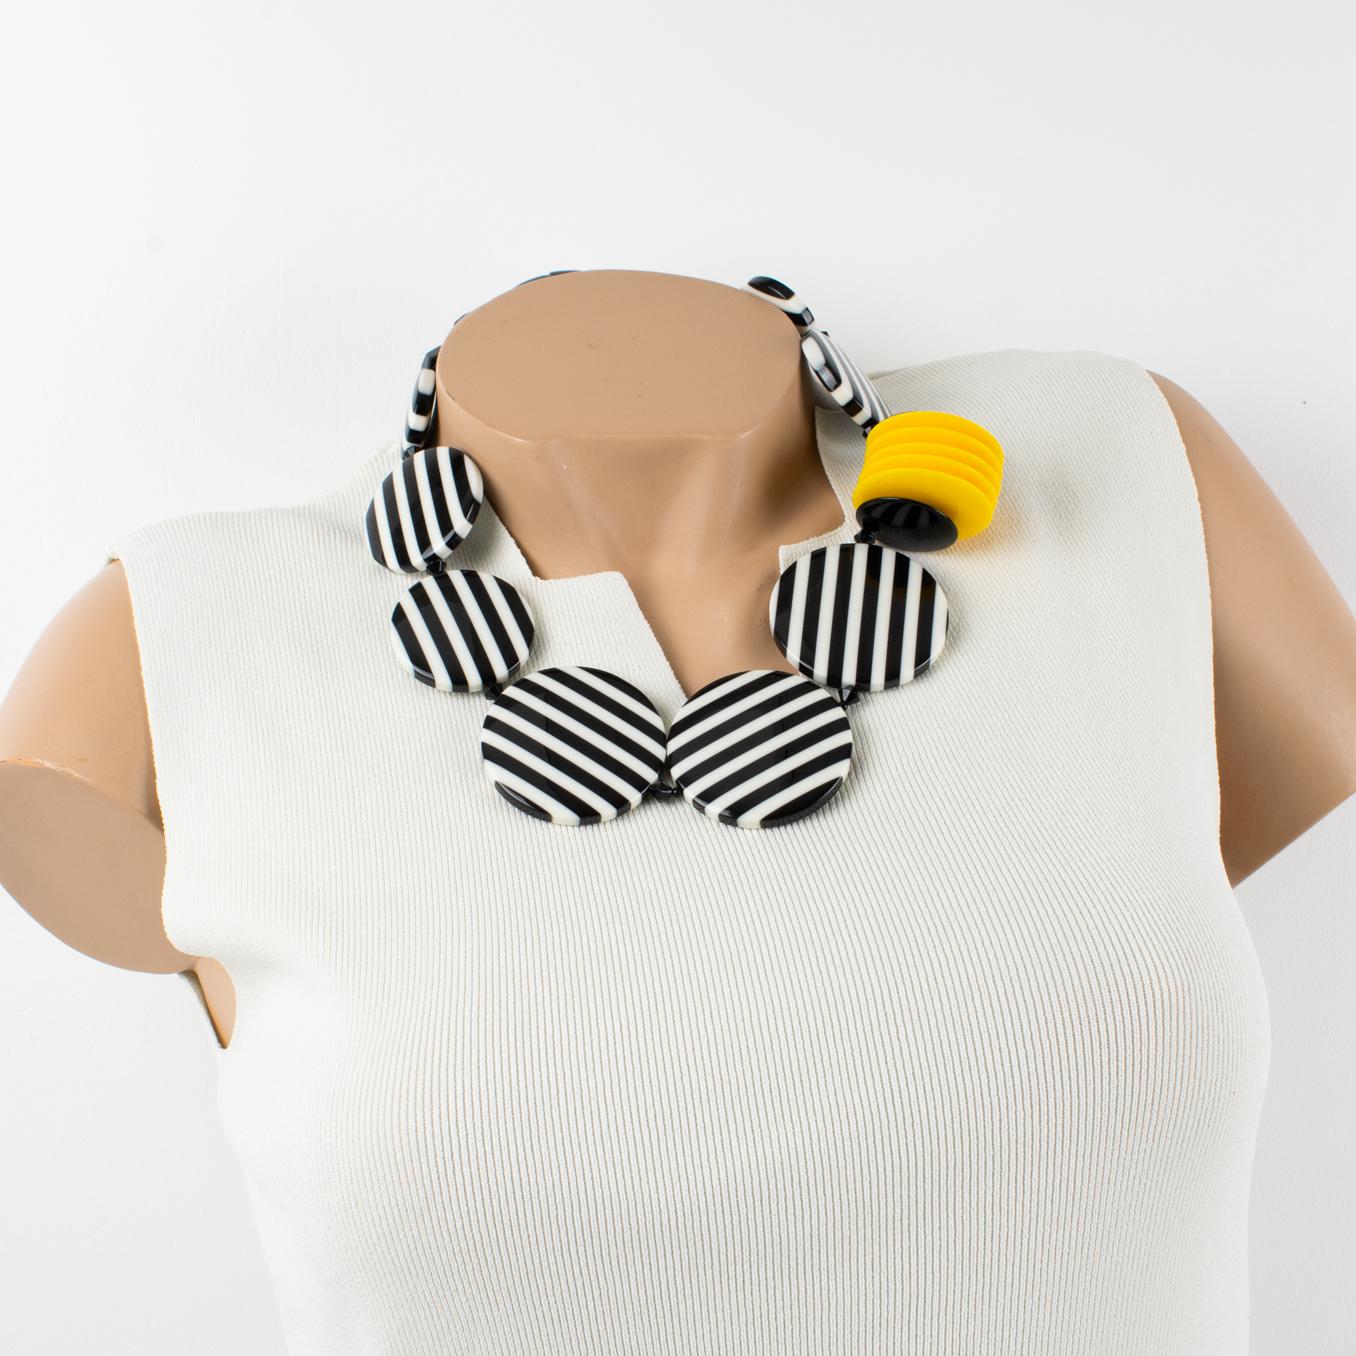 This lovely Angela Caputi, made in Italy choker necklace features an unusual color pattern. The choker is built with large flat disks in a black and white striped texture pattern and is contrasted with dimensional raised bright yellow flat disks.